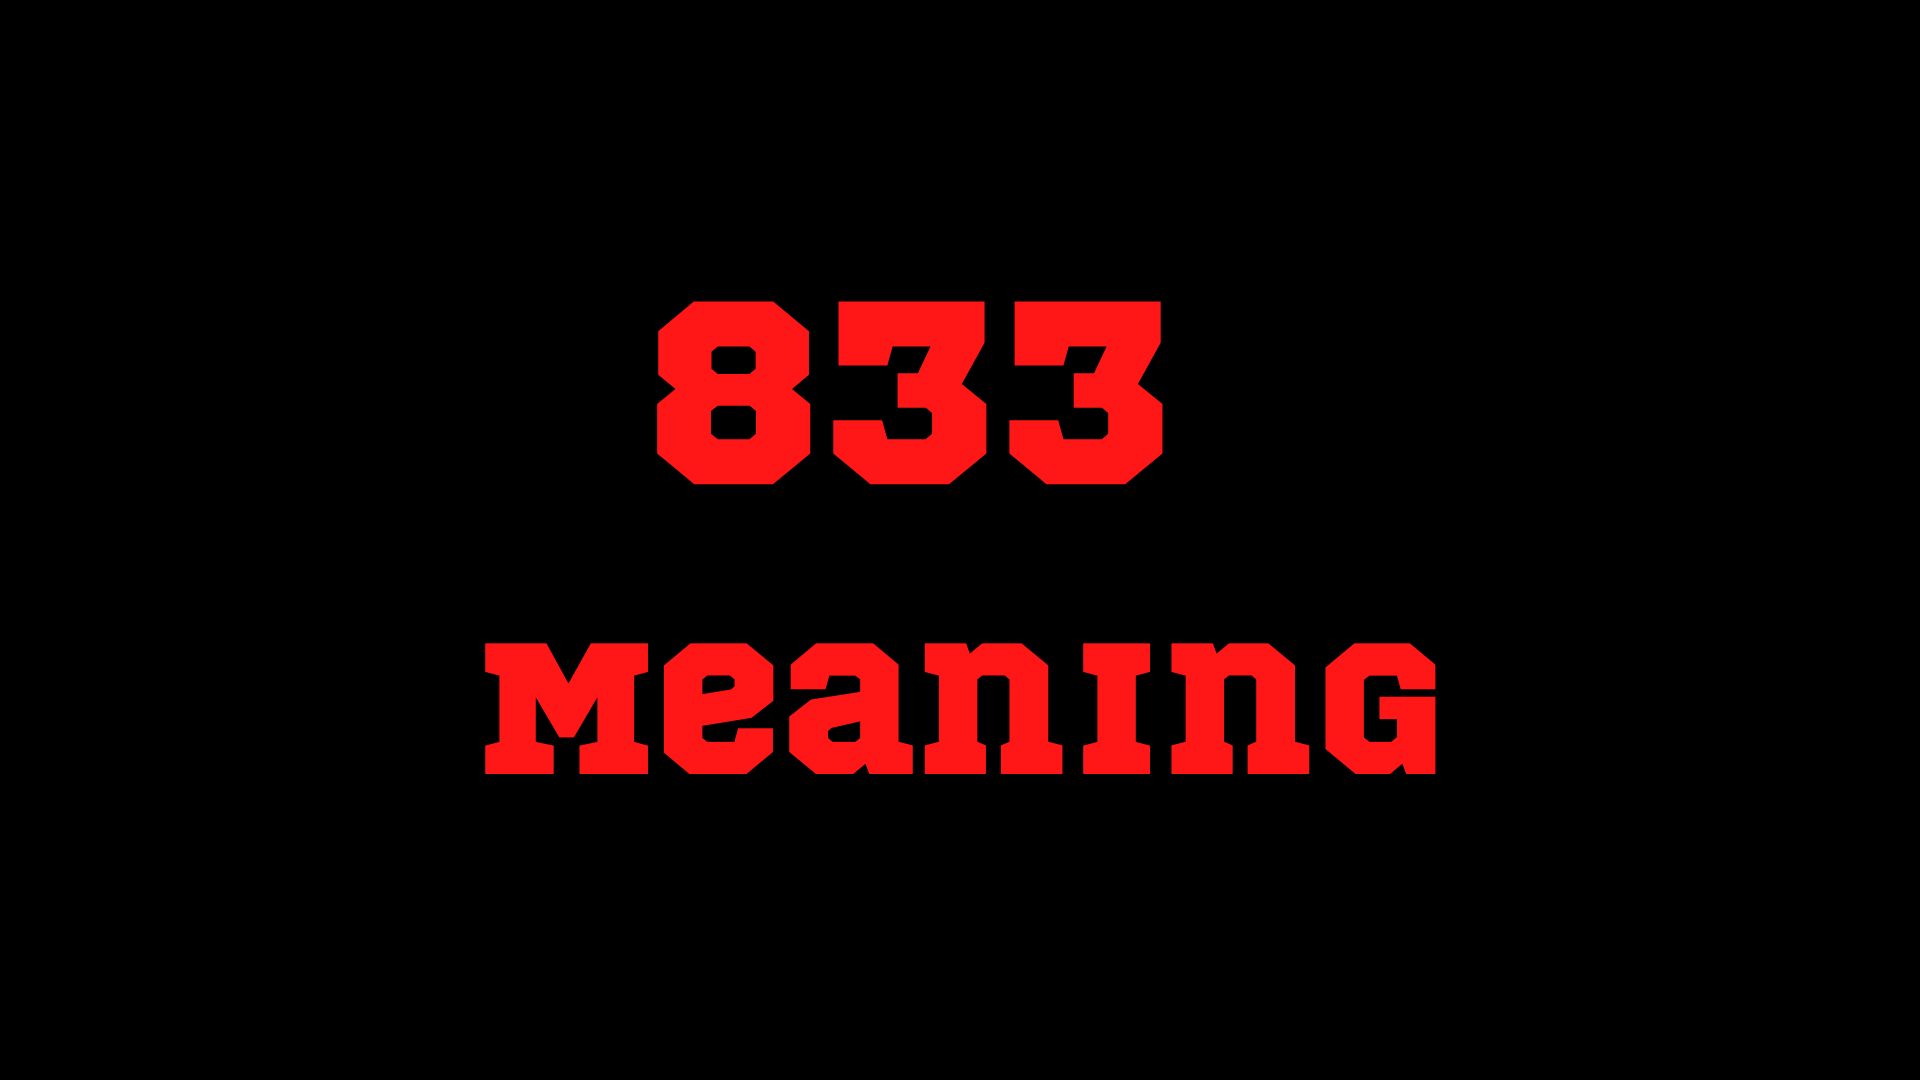 833 Meaning - Sign That You Are Being Fully Supported